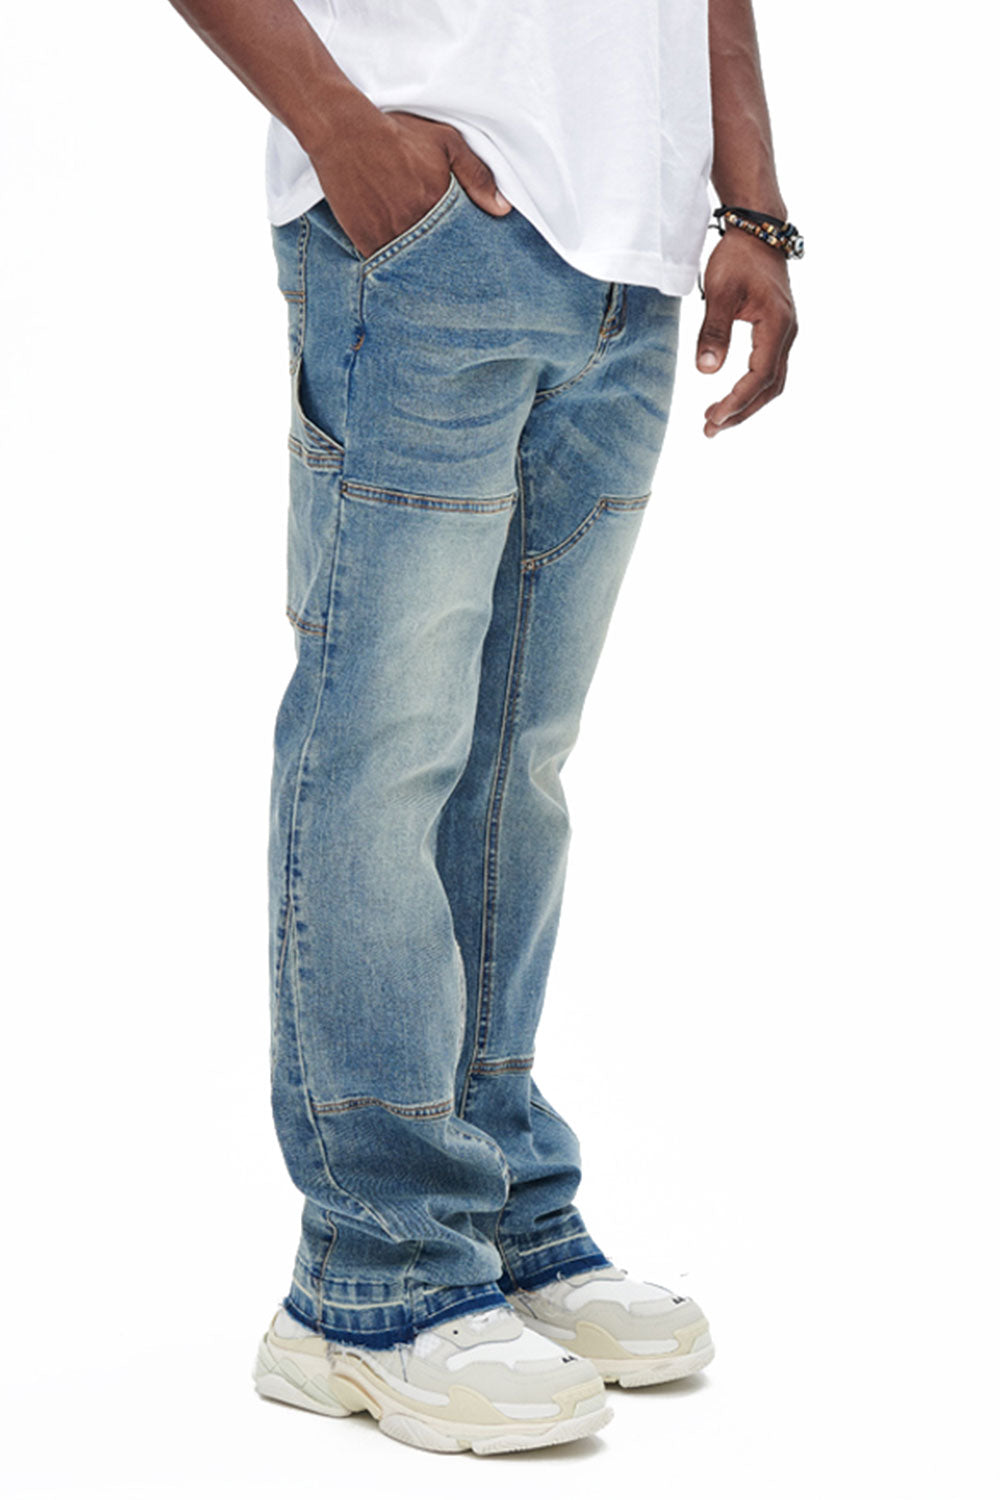 Gingtto's Mens Flared Casual Jeans: A Timeless Classic for Men